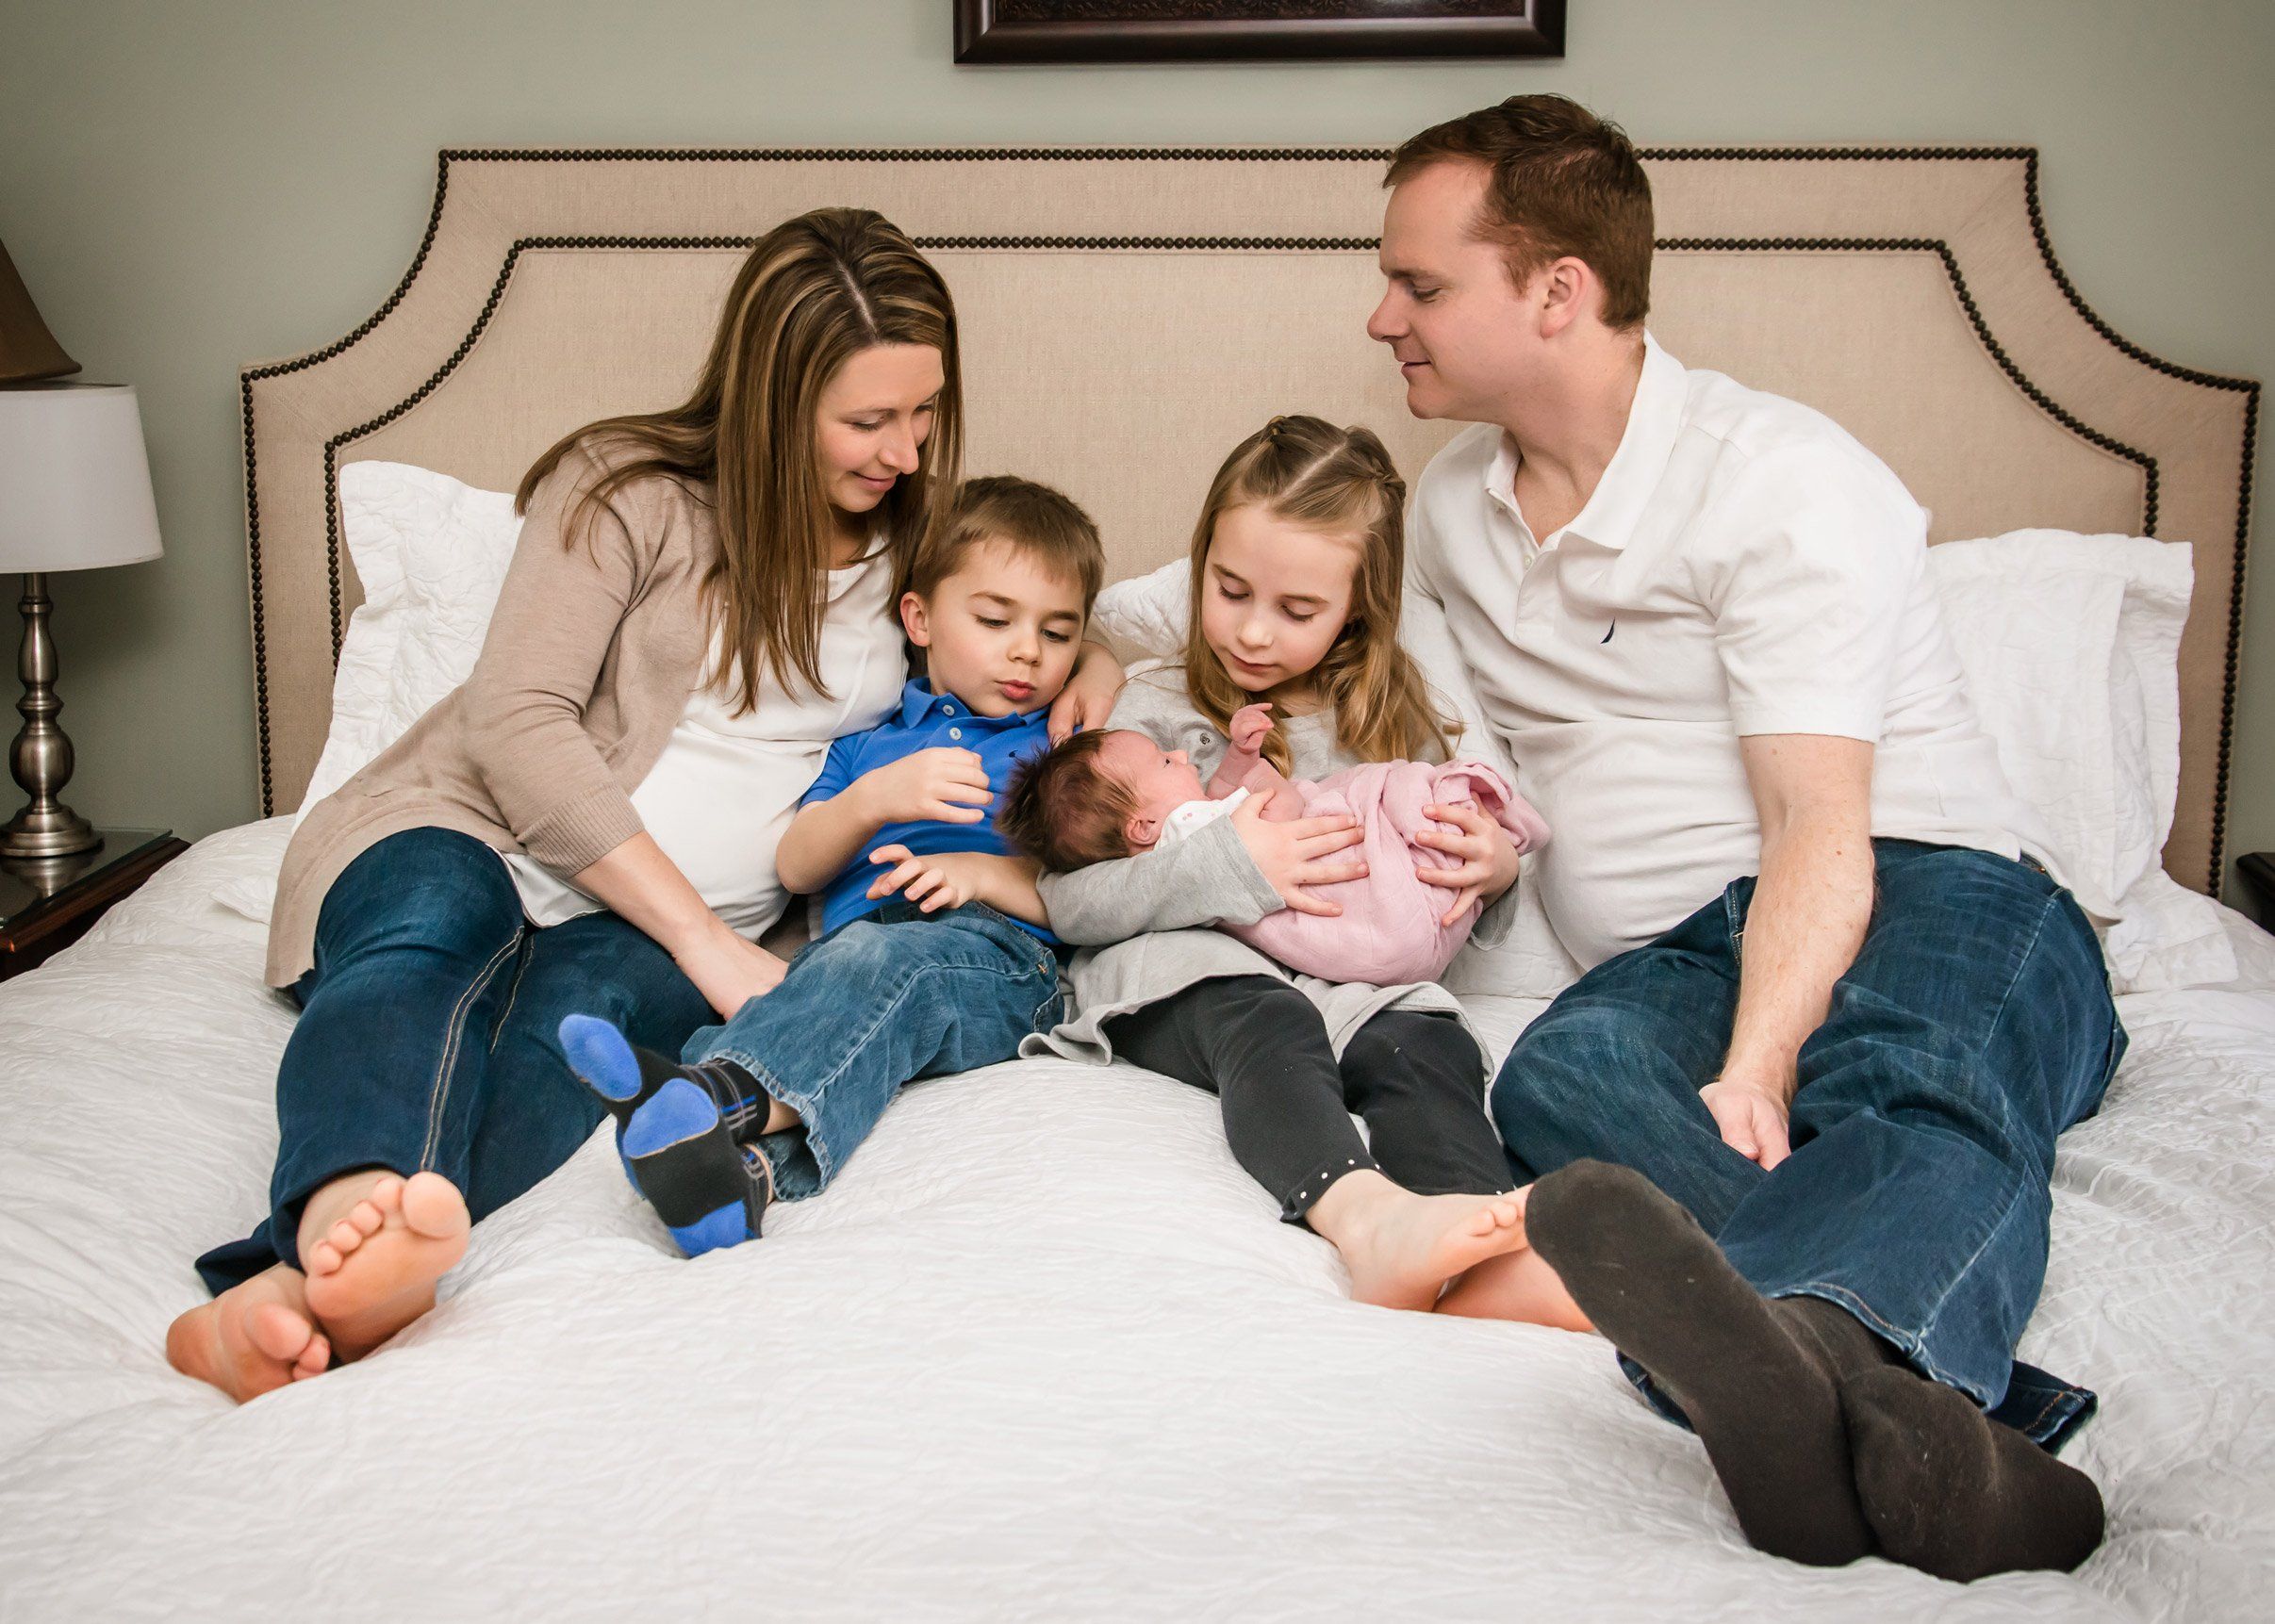 Mom and Dad with 3 kids in middle on bed holding newborn Mom and Dad with 3 kids in middle on bed holding newborn